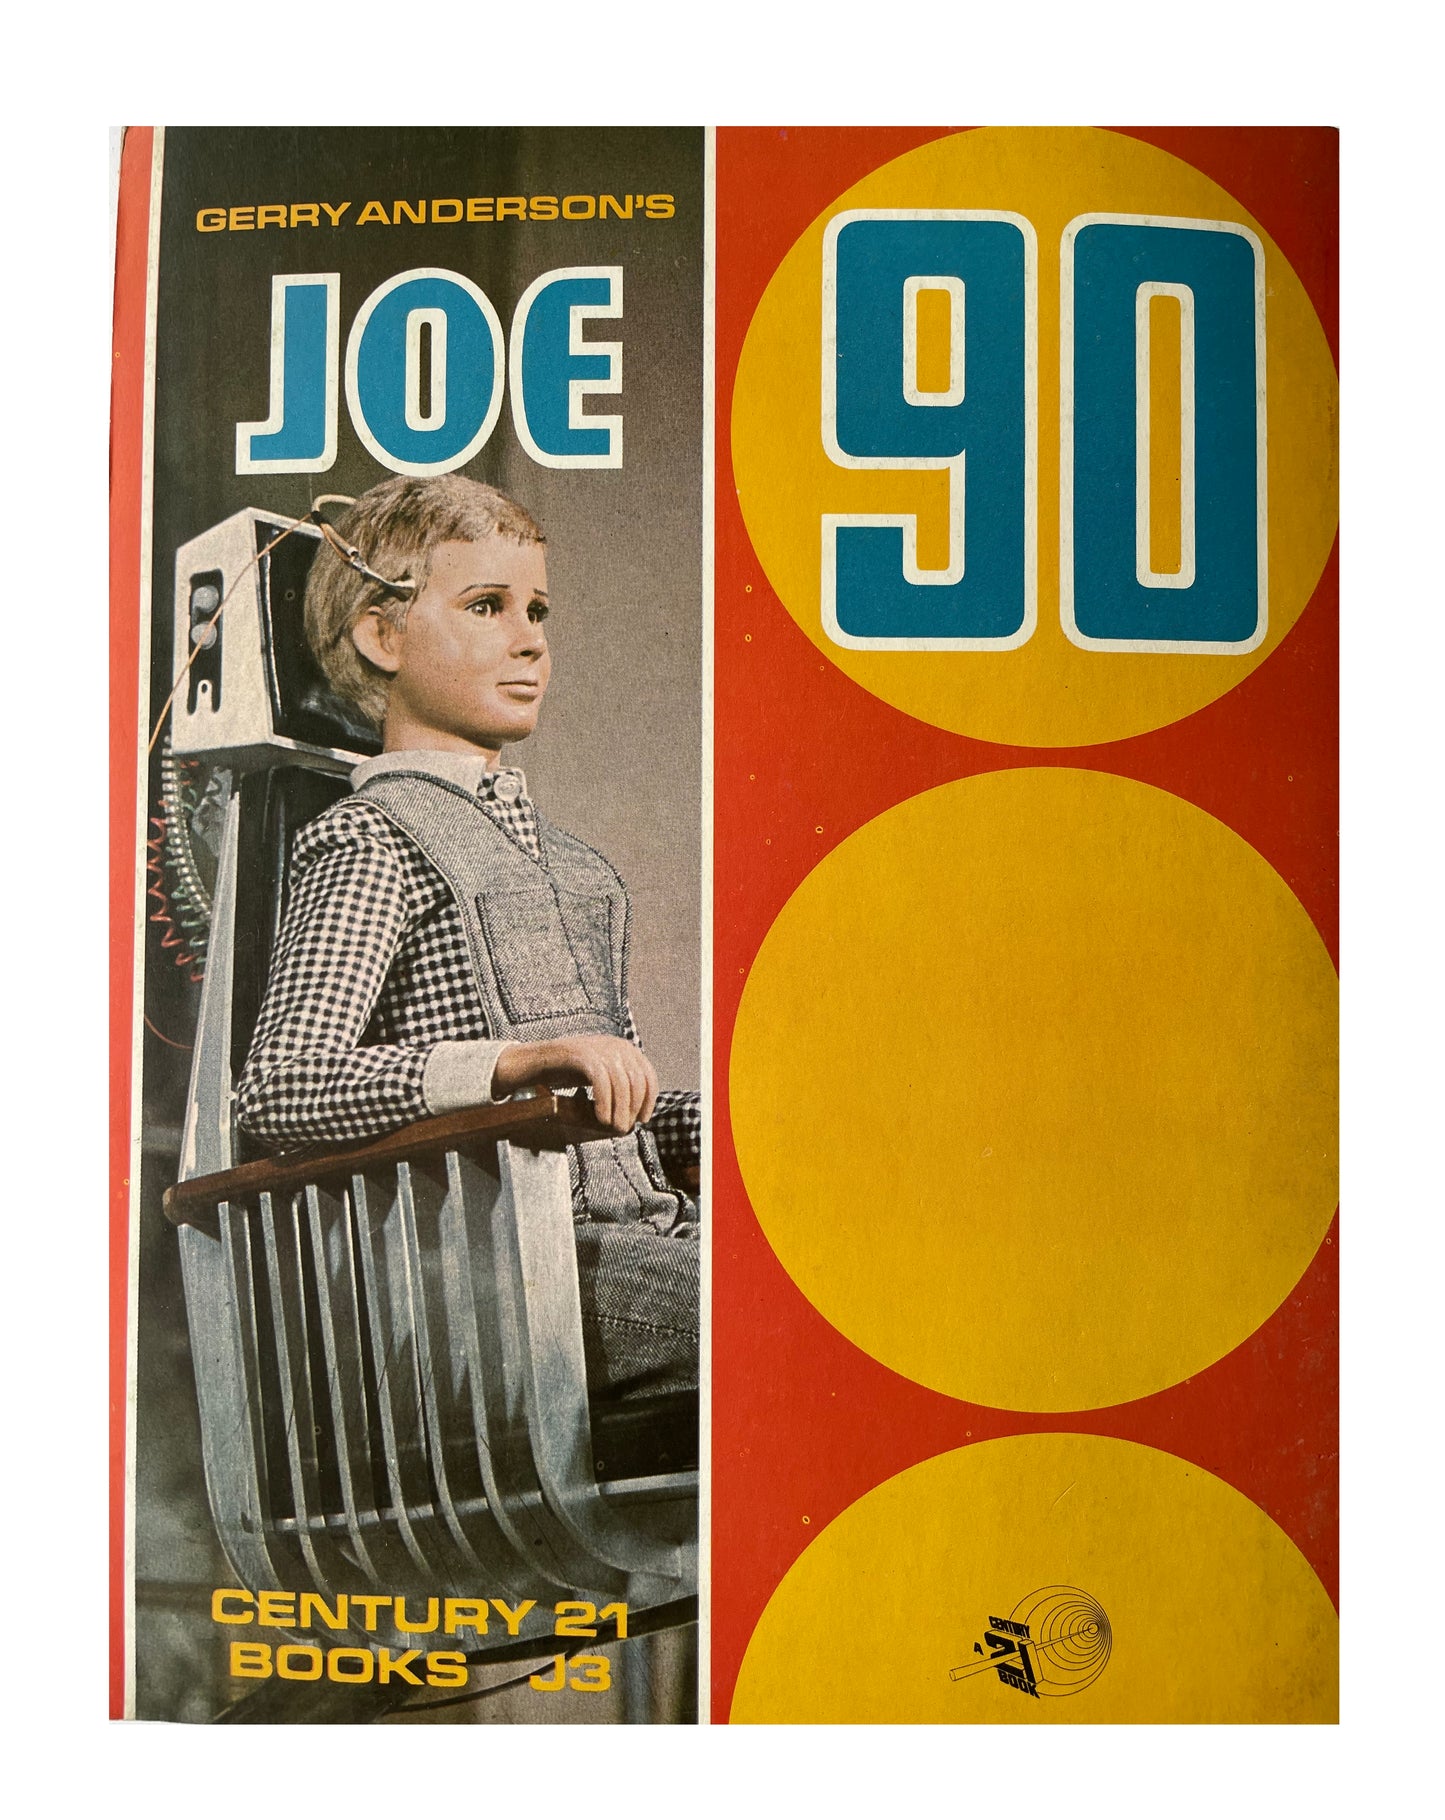 Vintage Gerry Andersons 1968 Ultra Rare Joe 90 Dot To Dot Book - As Seen In The Television Series - Century 21 Publishing - Shop Stock Room Find